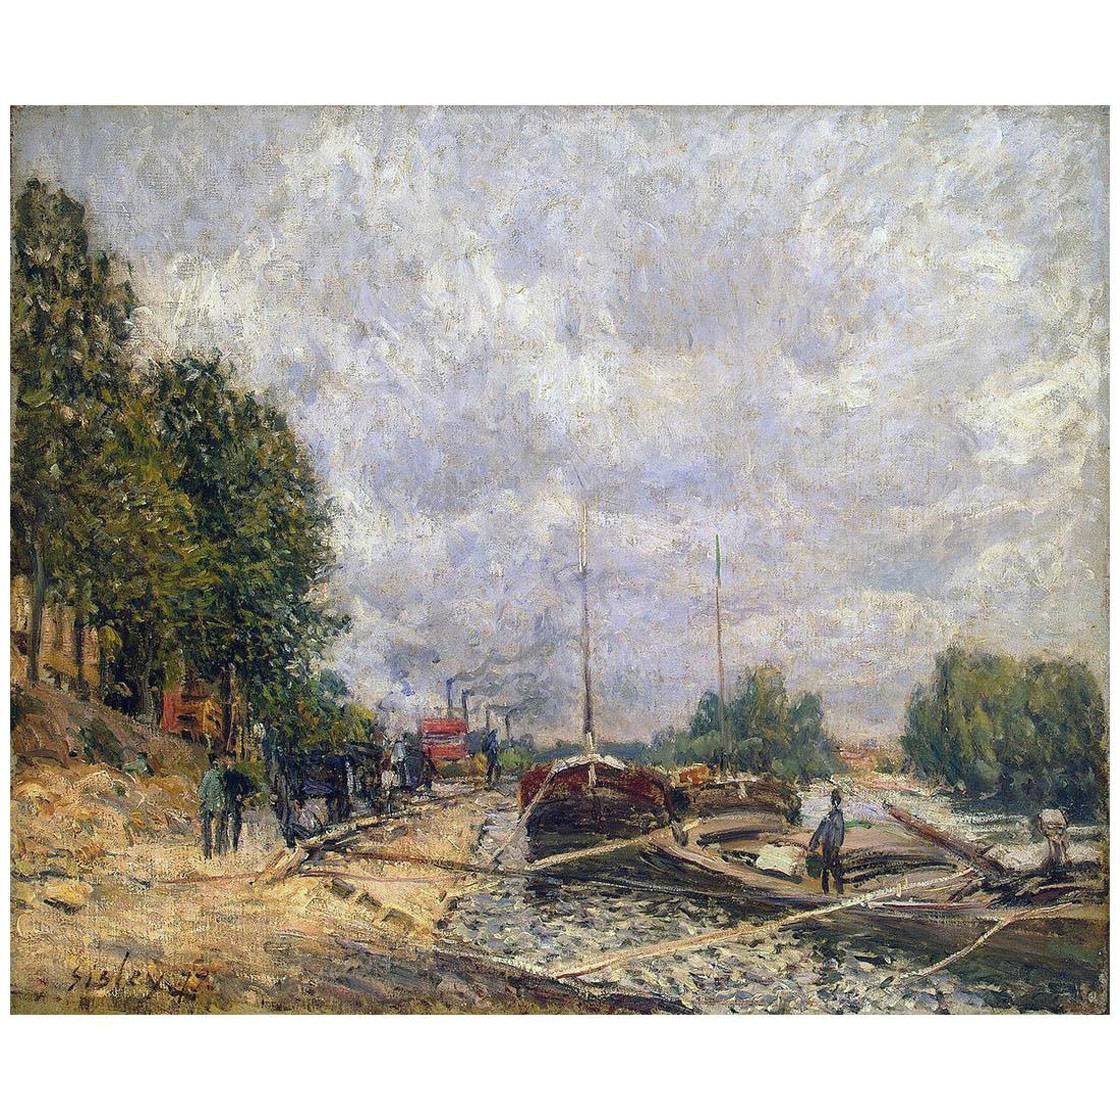 Alfred Sisley. Les barges a Billancourt. 1877. Hermitage